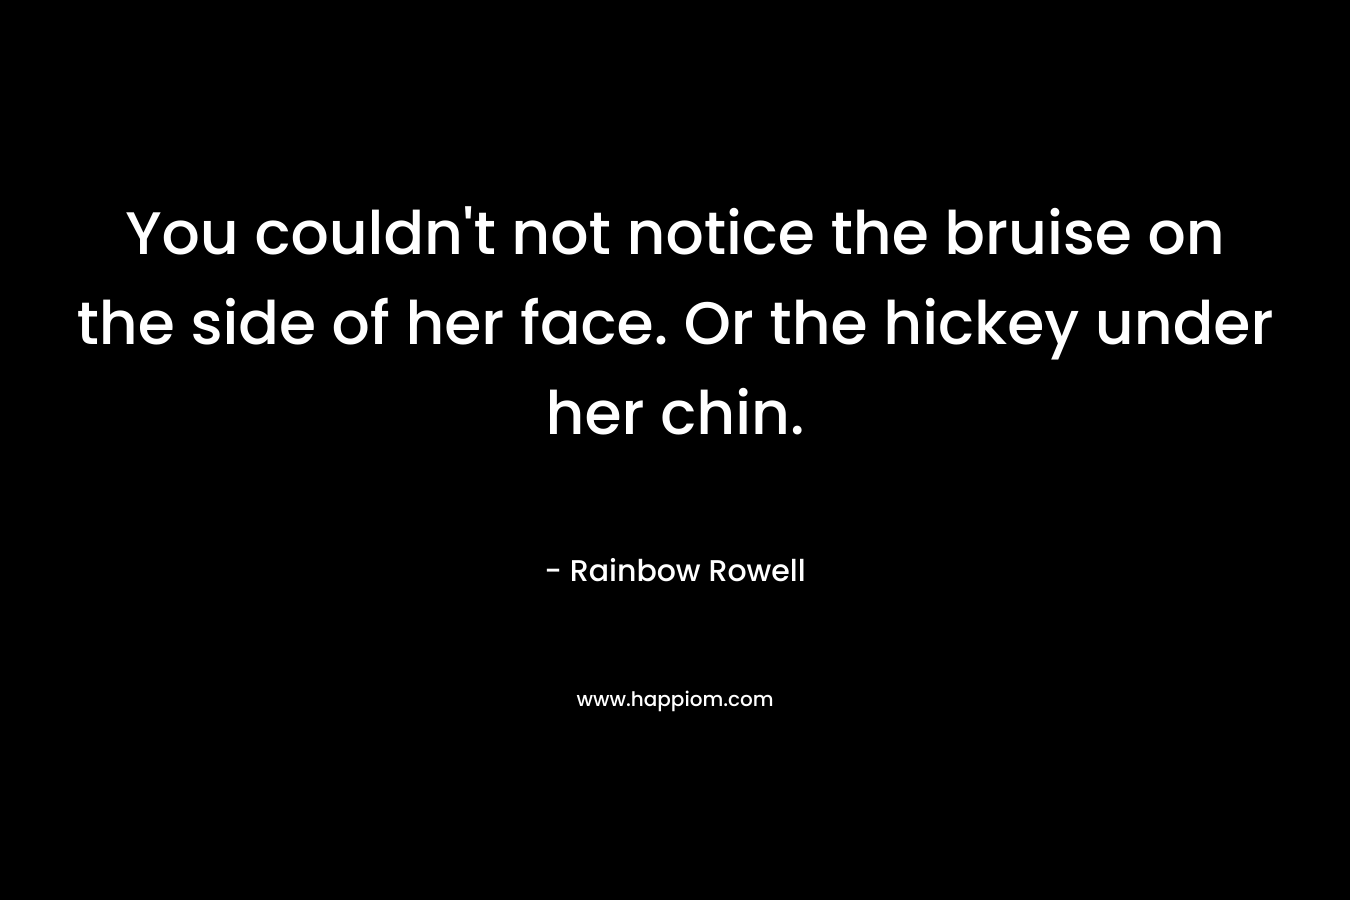 You couldn’t not notice the bruise on the side of her face. Or the hickey under her chin. – Rainbow Rowell